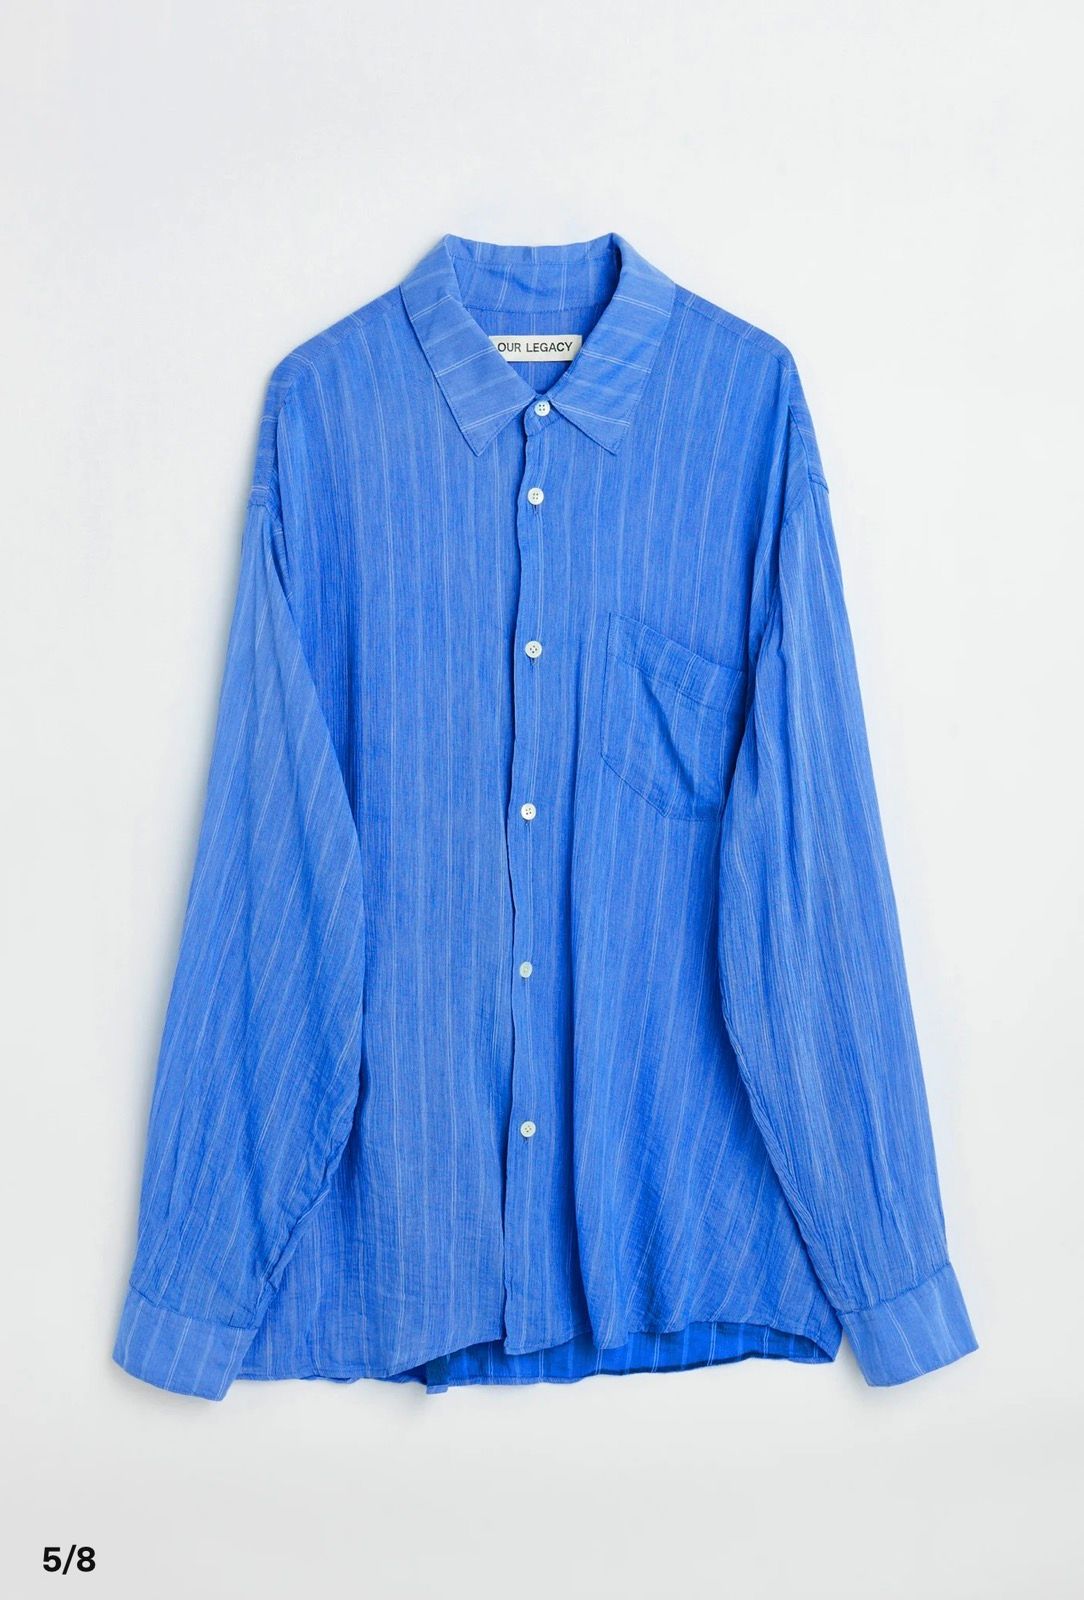 Pre-owned Our Legacy Initial Shirt Blue Stripe